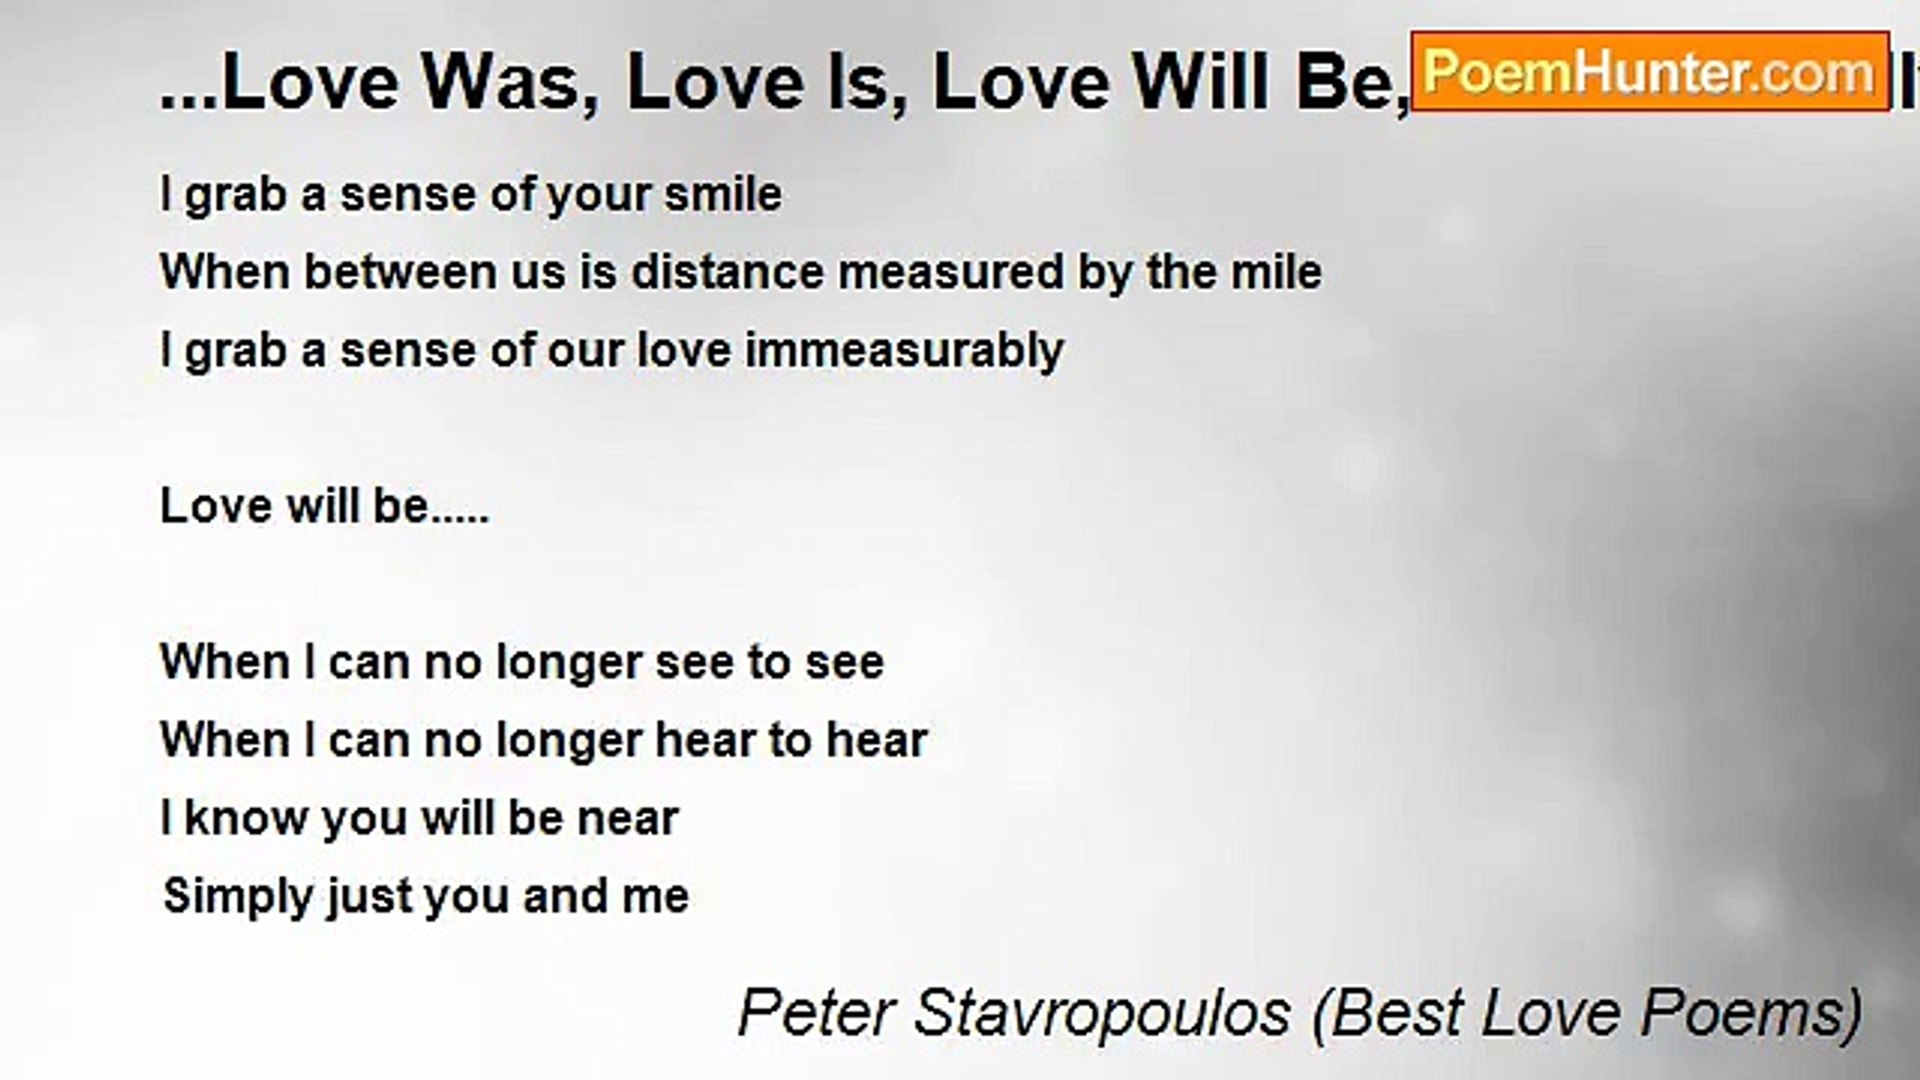 ⁣Peter Stavropoulos (Best Love Poems) - ...Love Was, Love Is, Love Will Be, Love Eternally